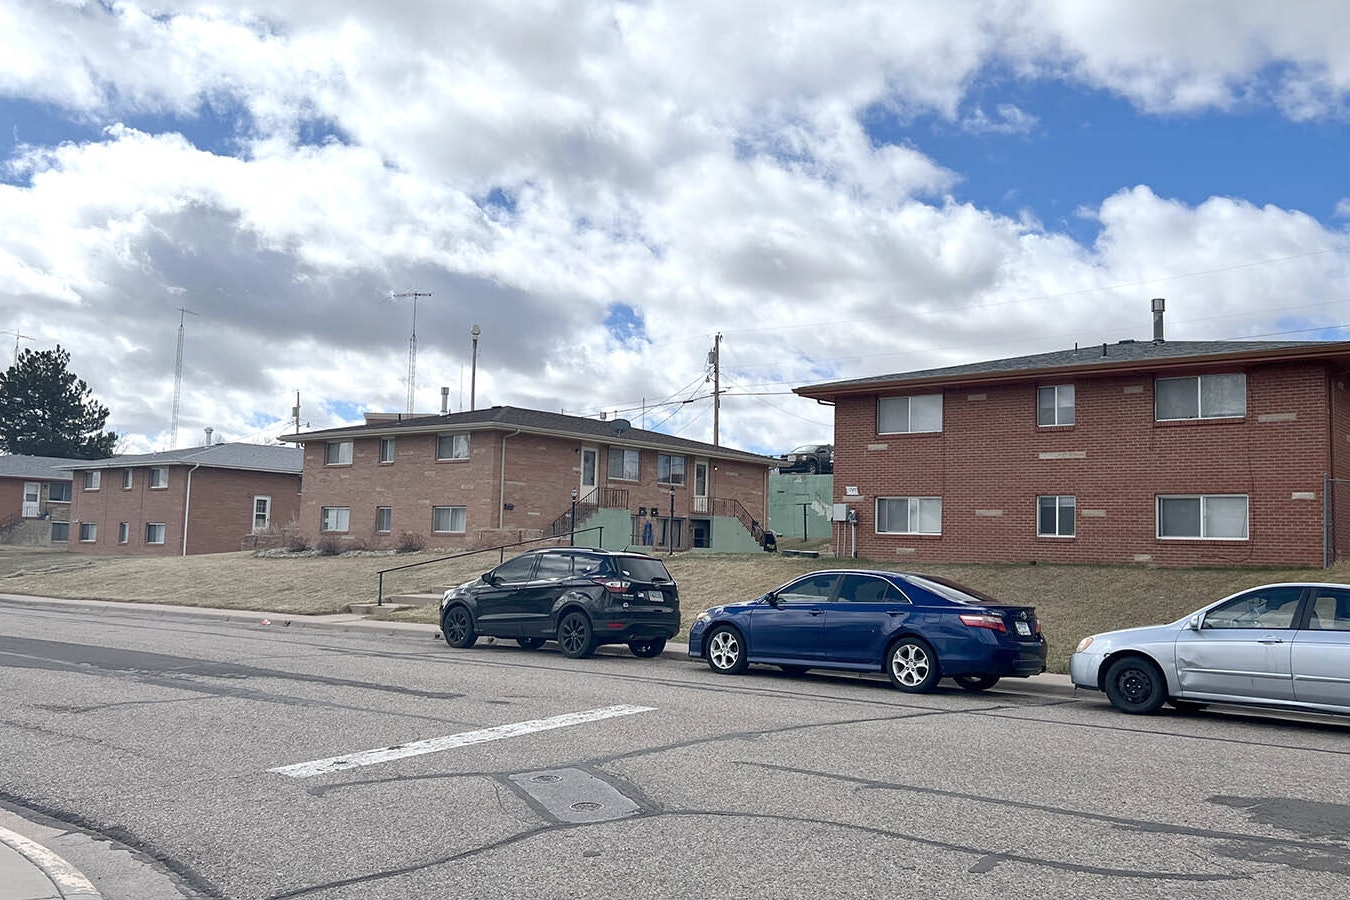 A man died after being shot several times March 30 during an alleged domestic violence incident in the 1700 block of Oxford Drive in Cheyenne.